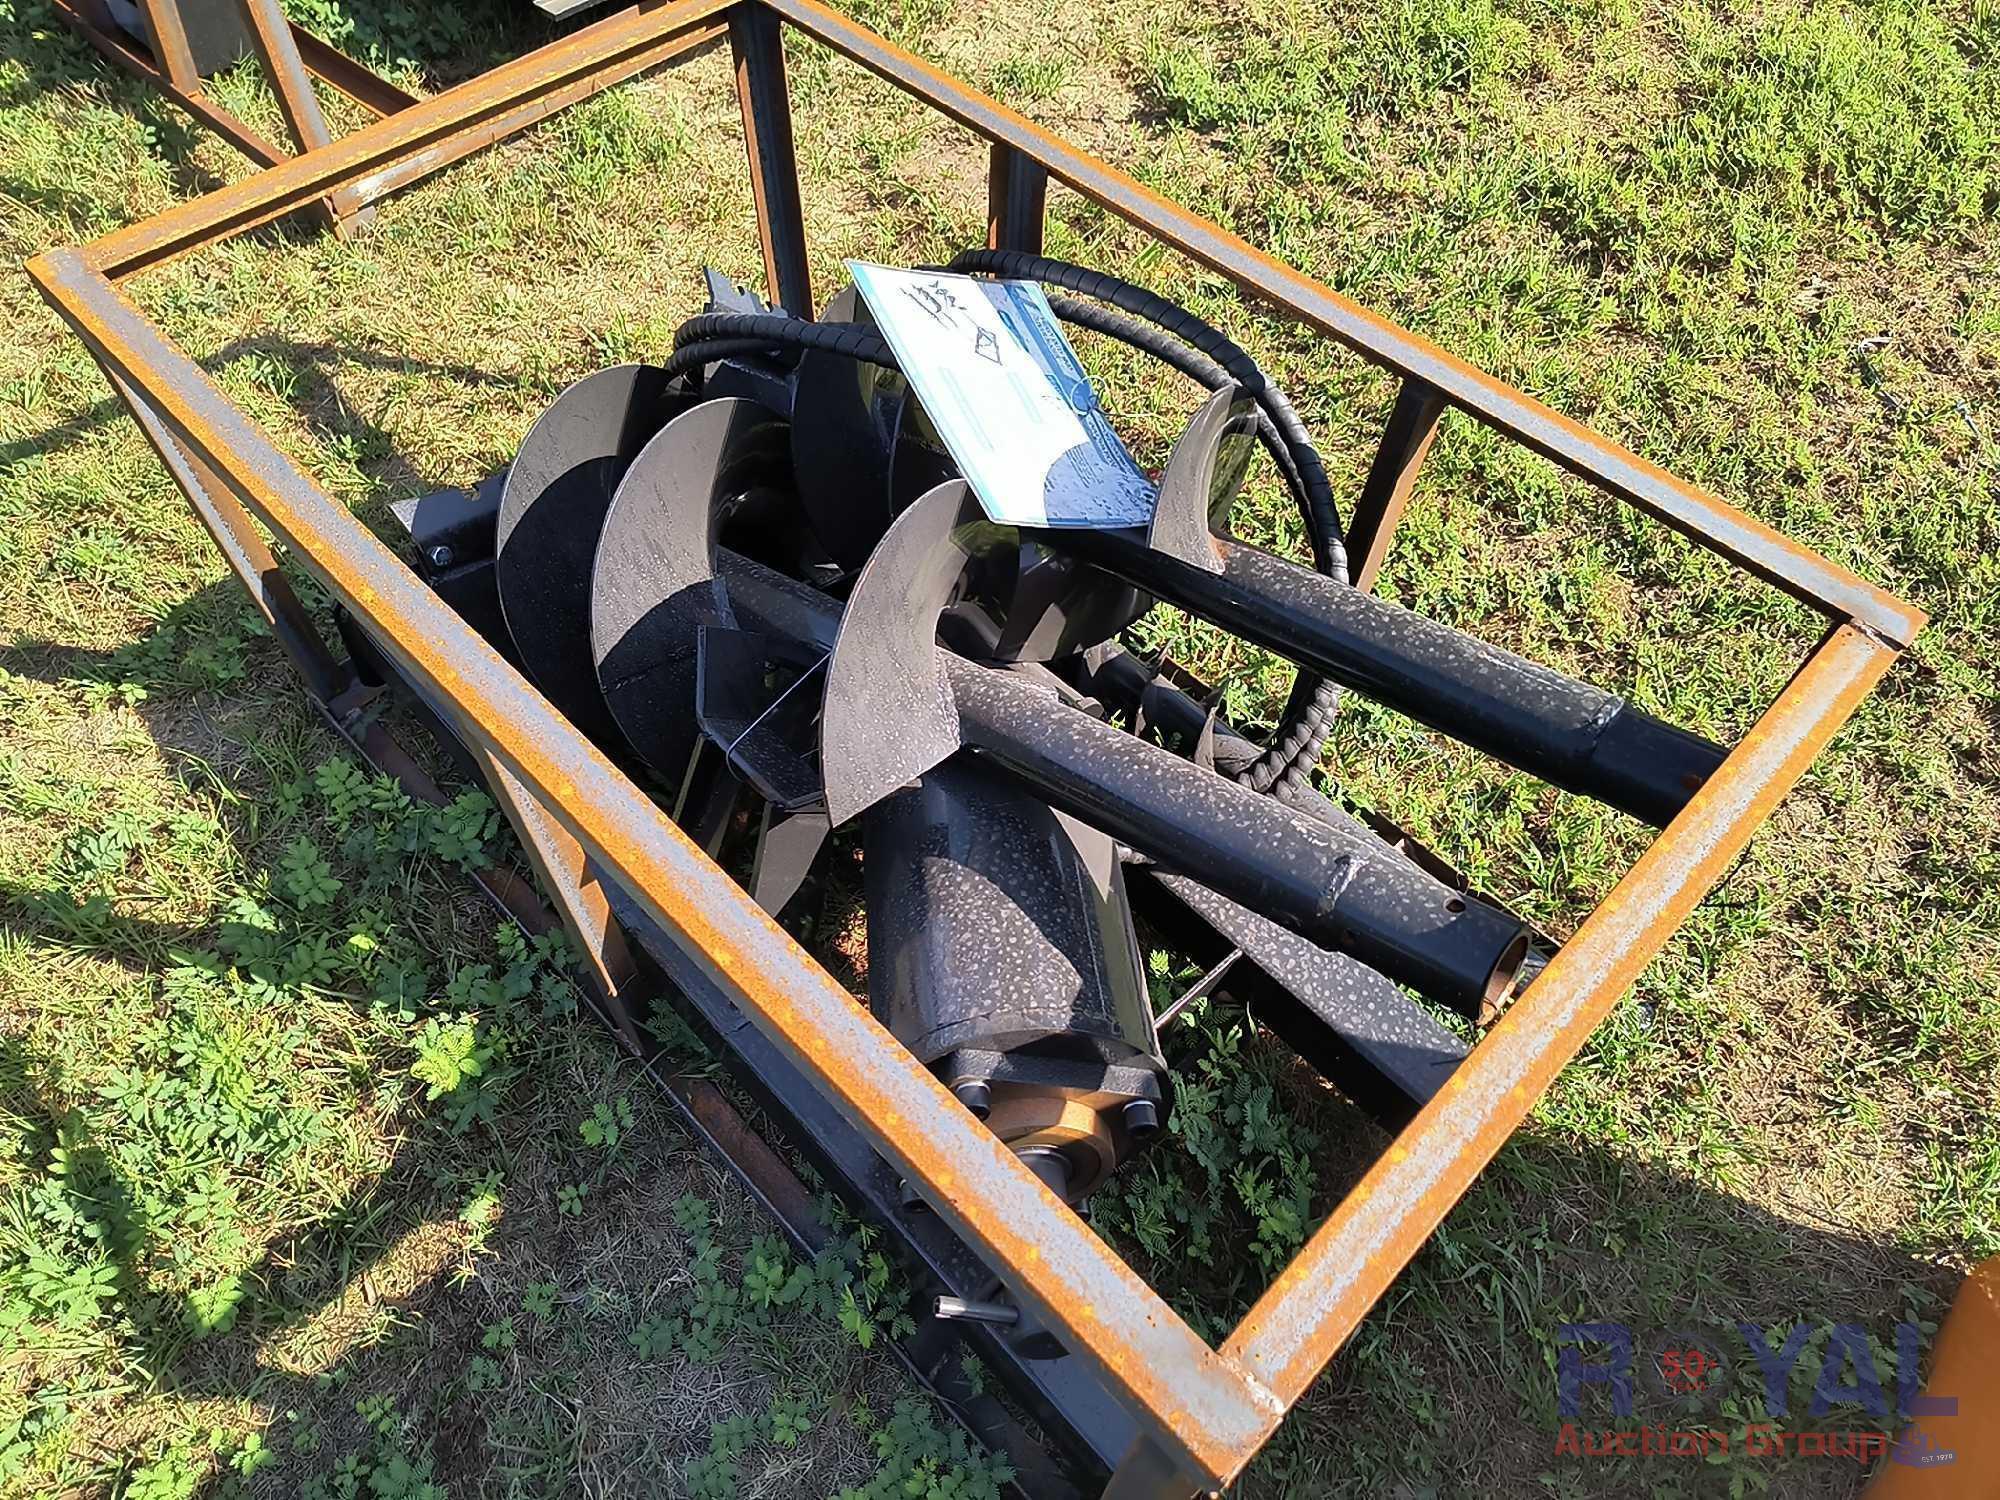 2024 Mower King SSECAG-Y Skid Steer Auger Attachment with 3 Bits